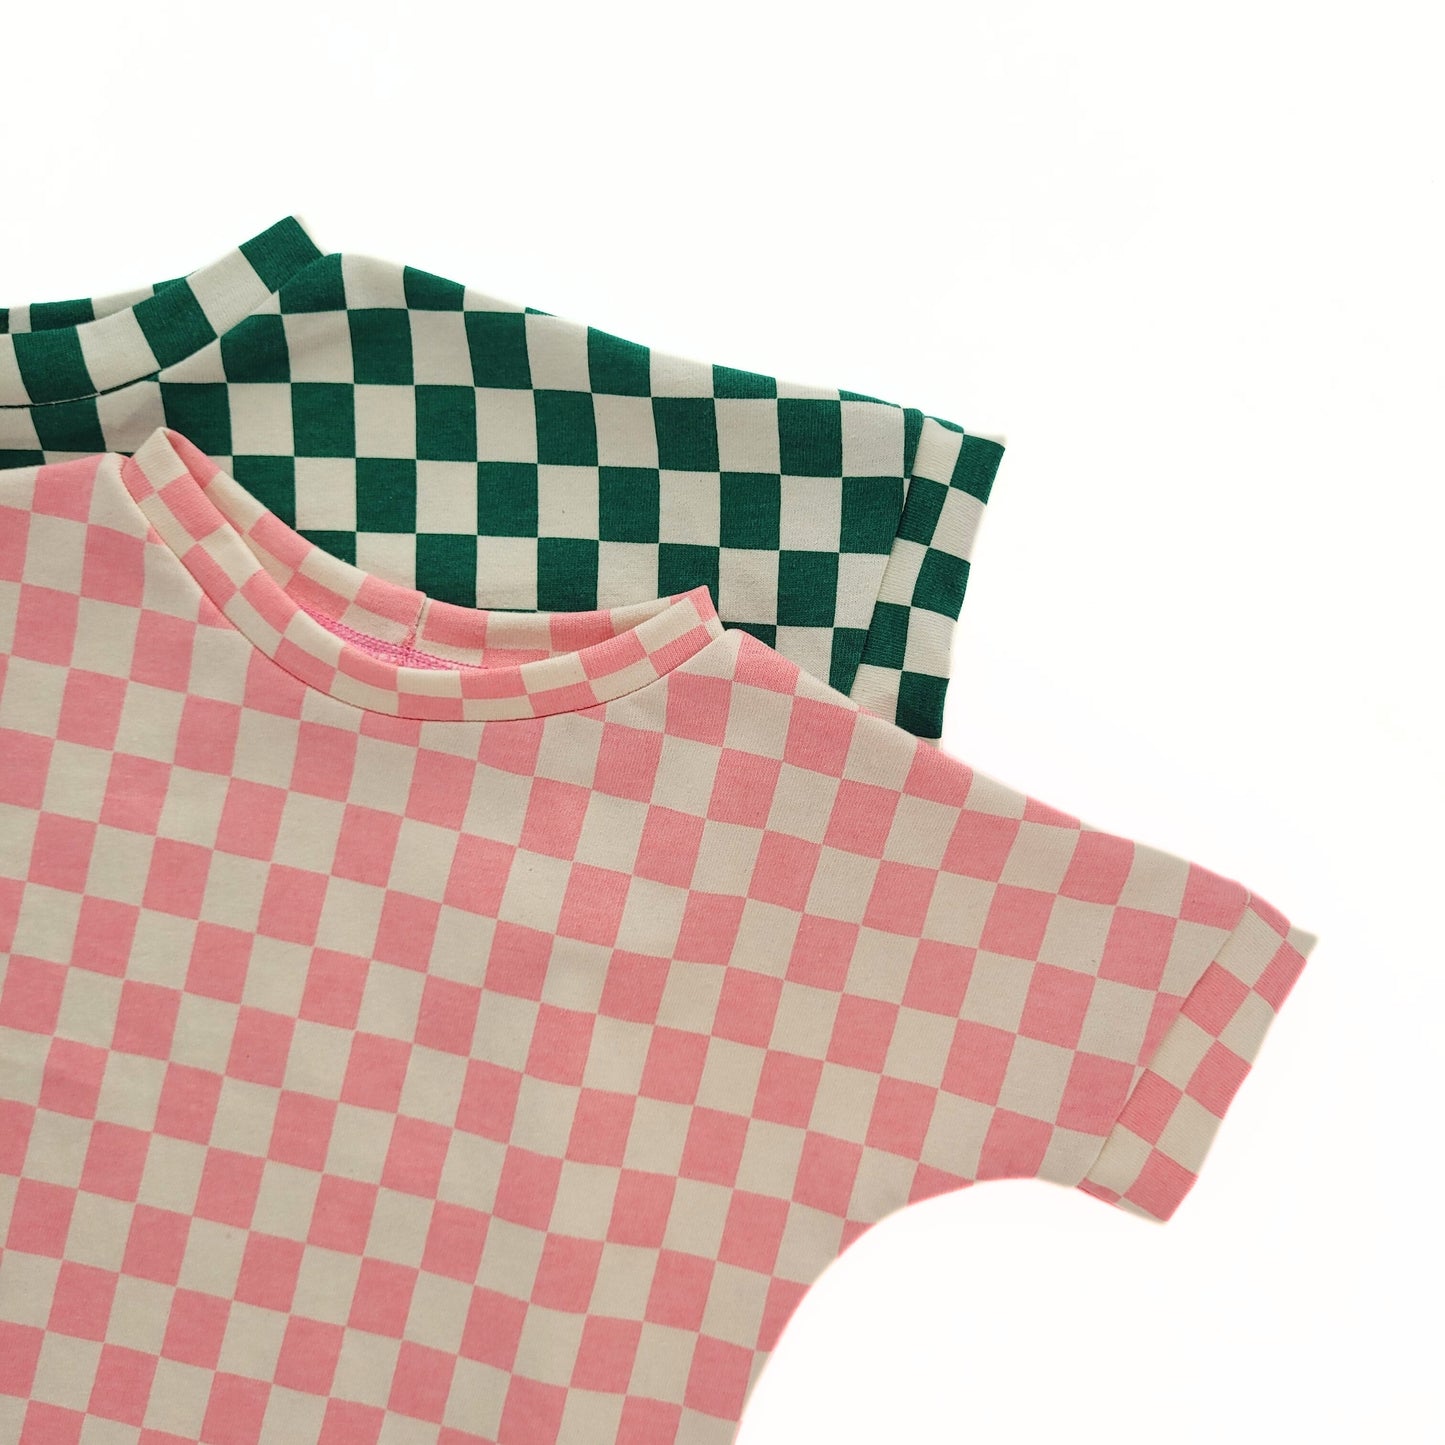 Grow With Me T-Shirt | Pink Checkered print